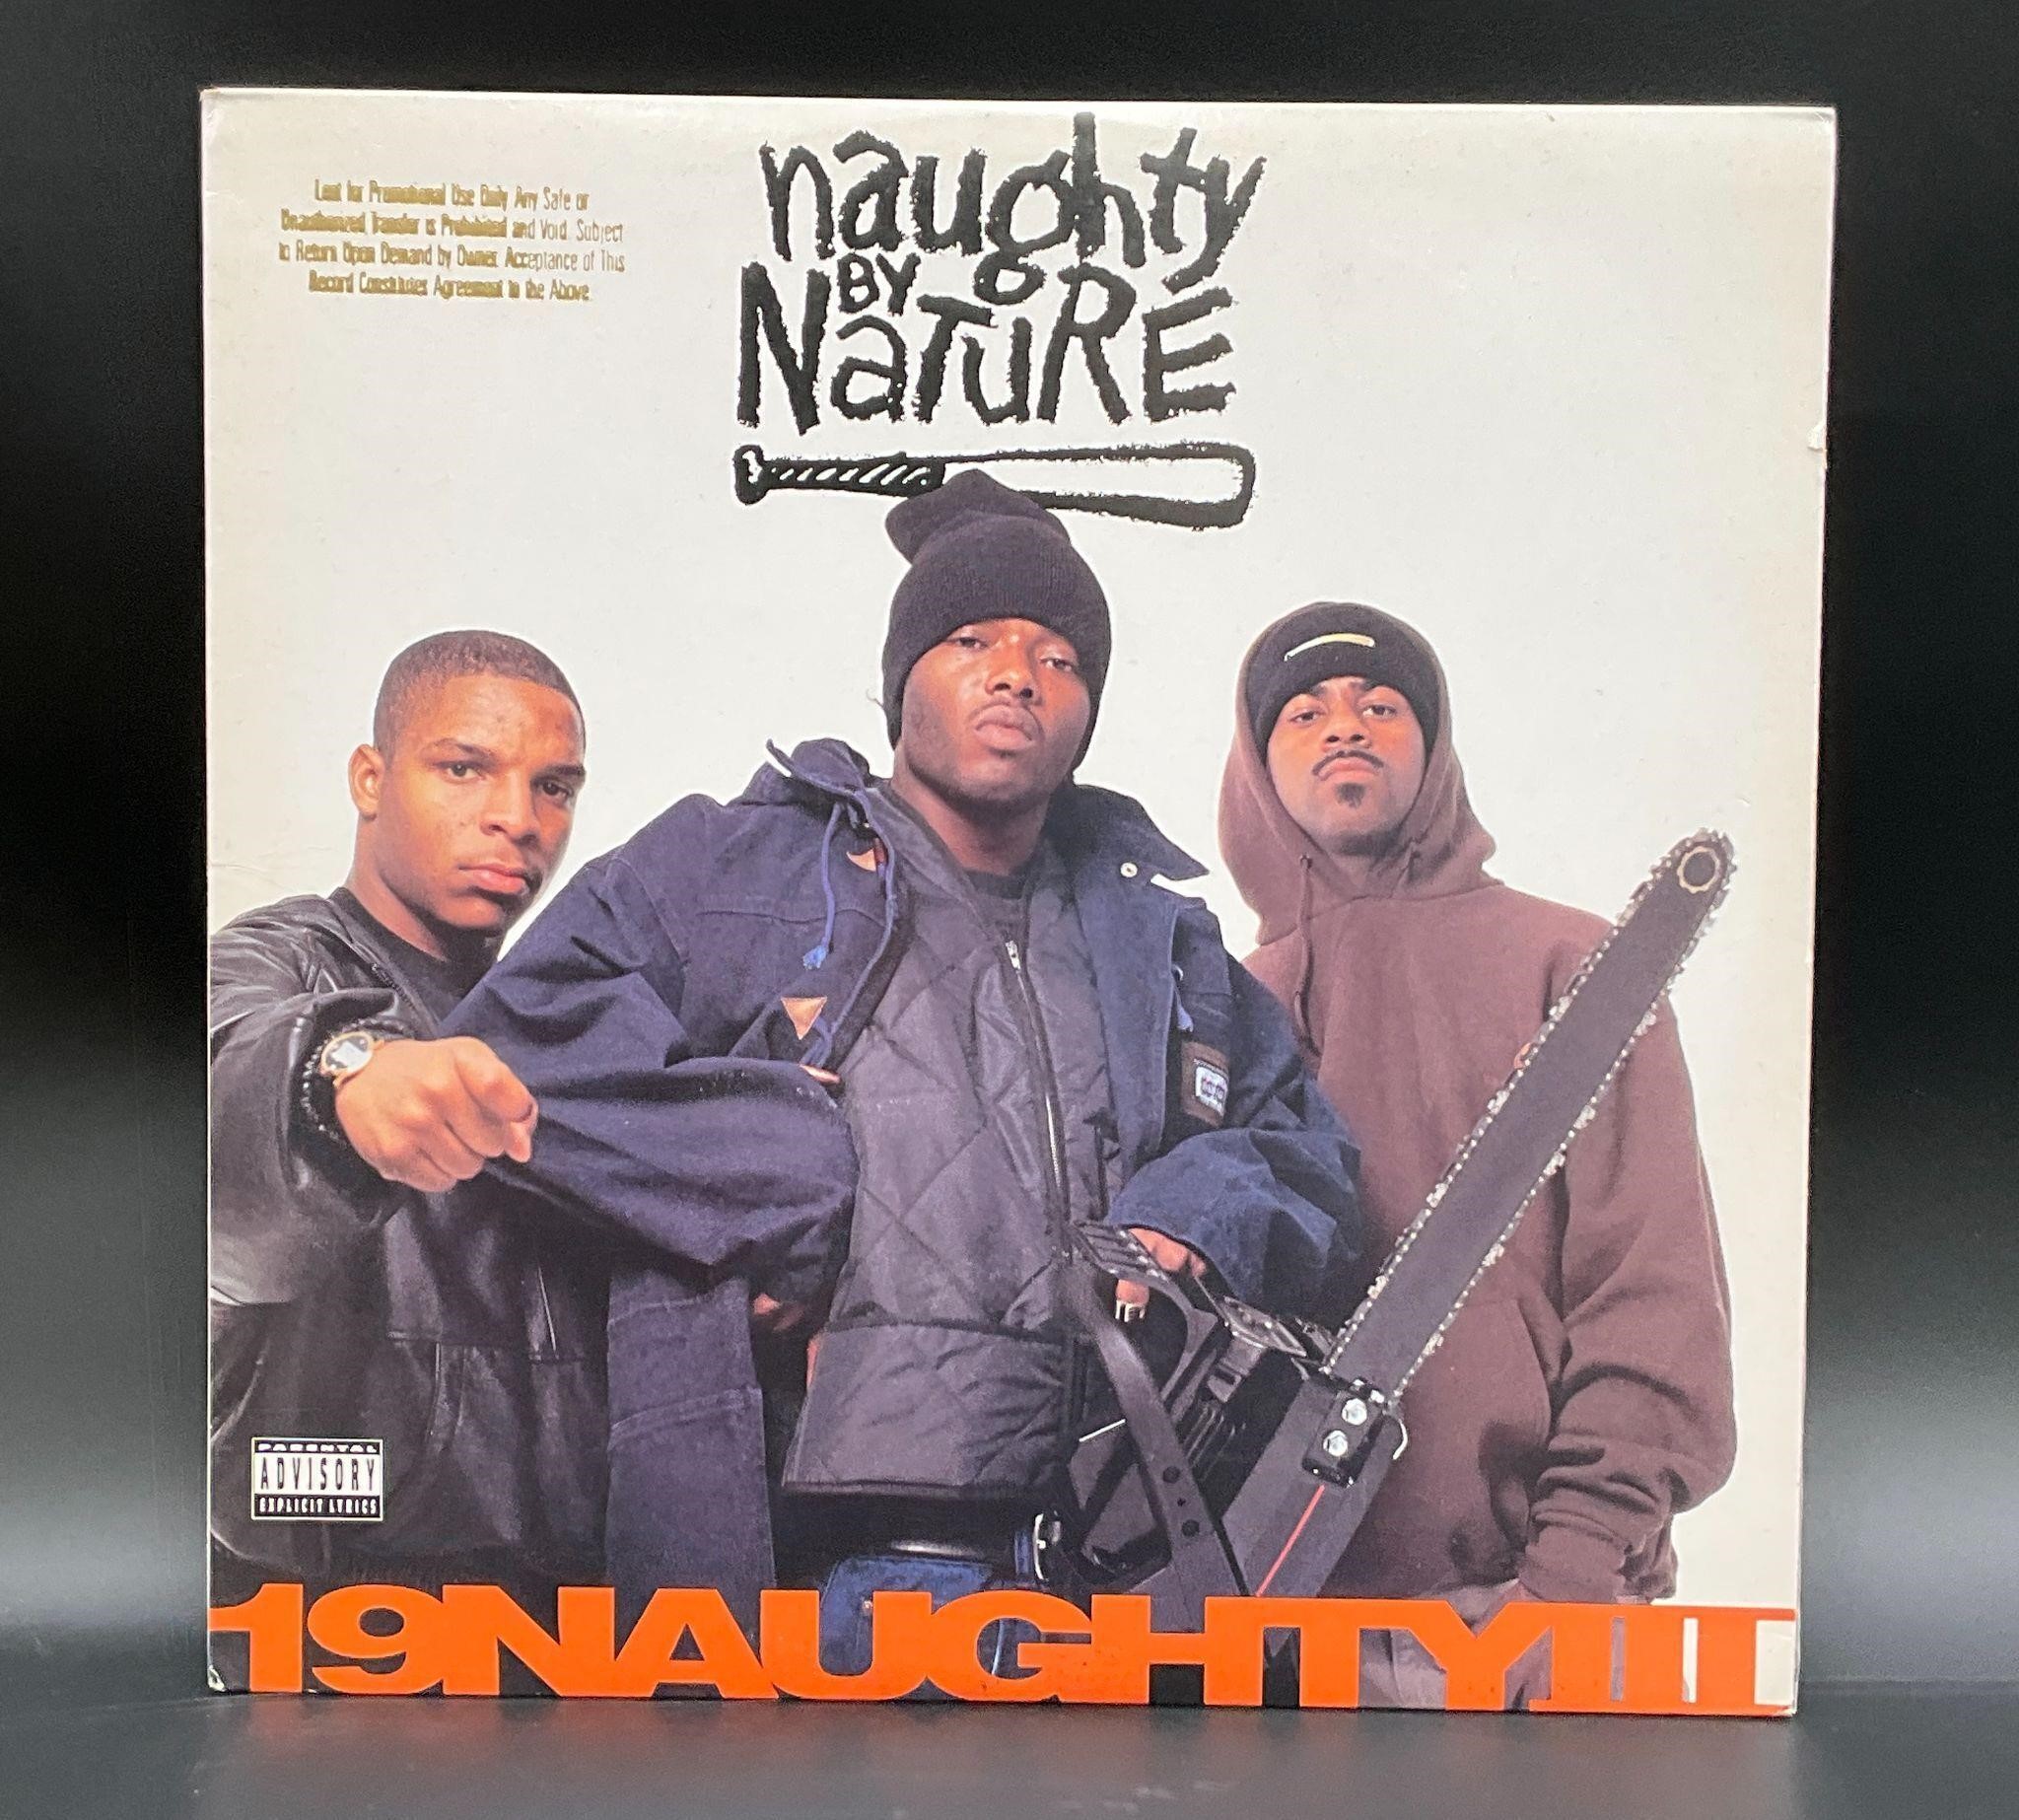 1993 Naughty By Nature "19 Naughy lll" Promo LP